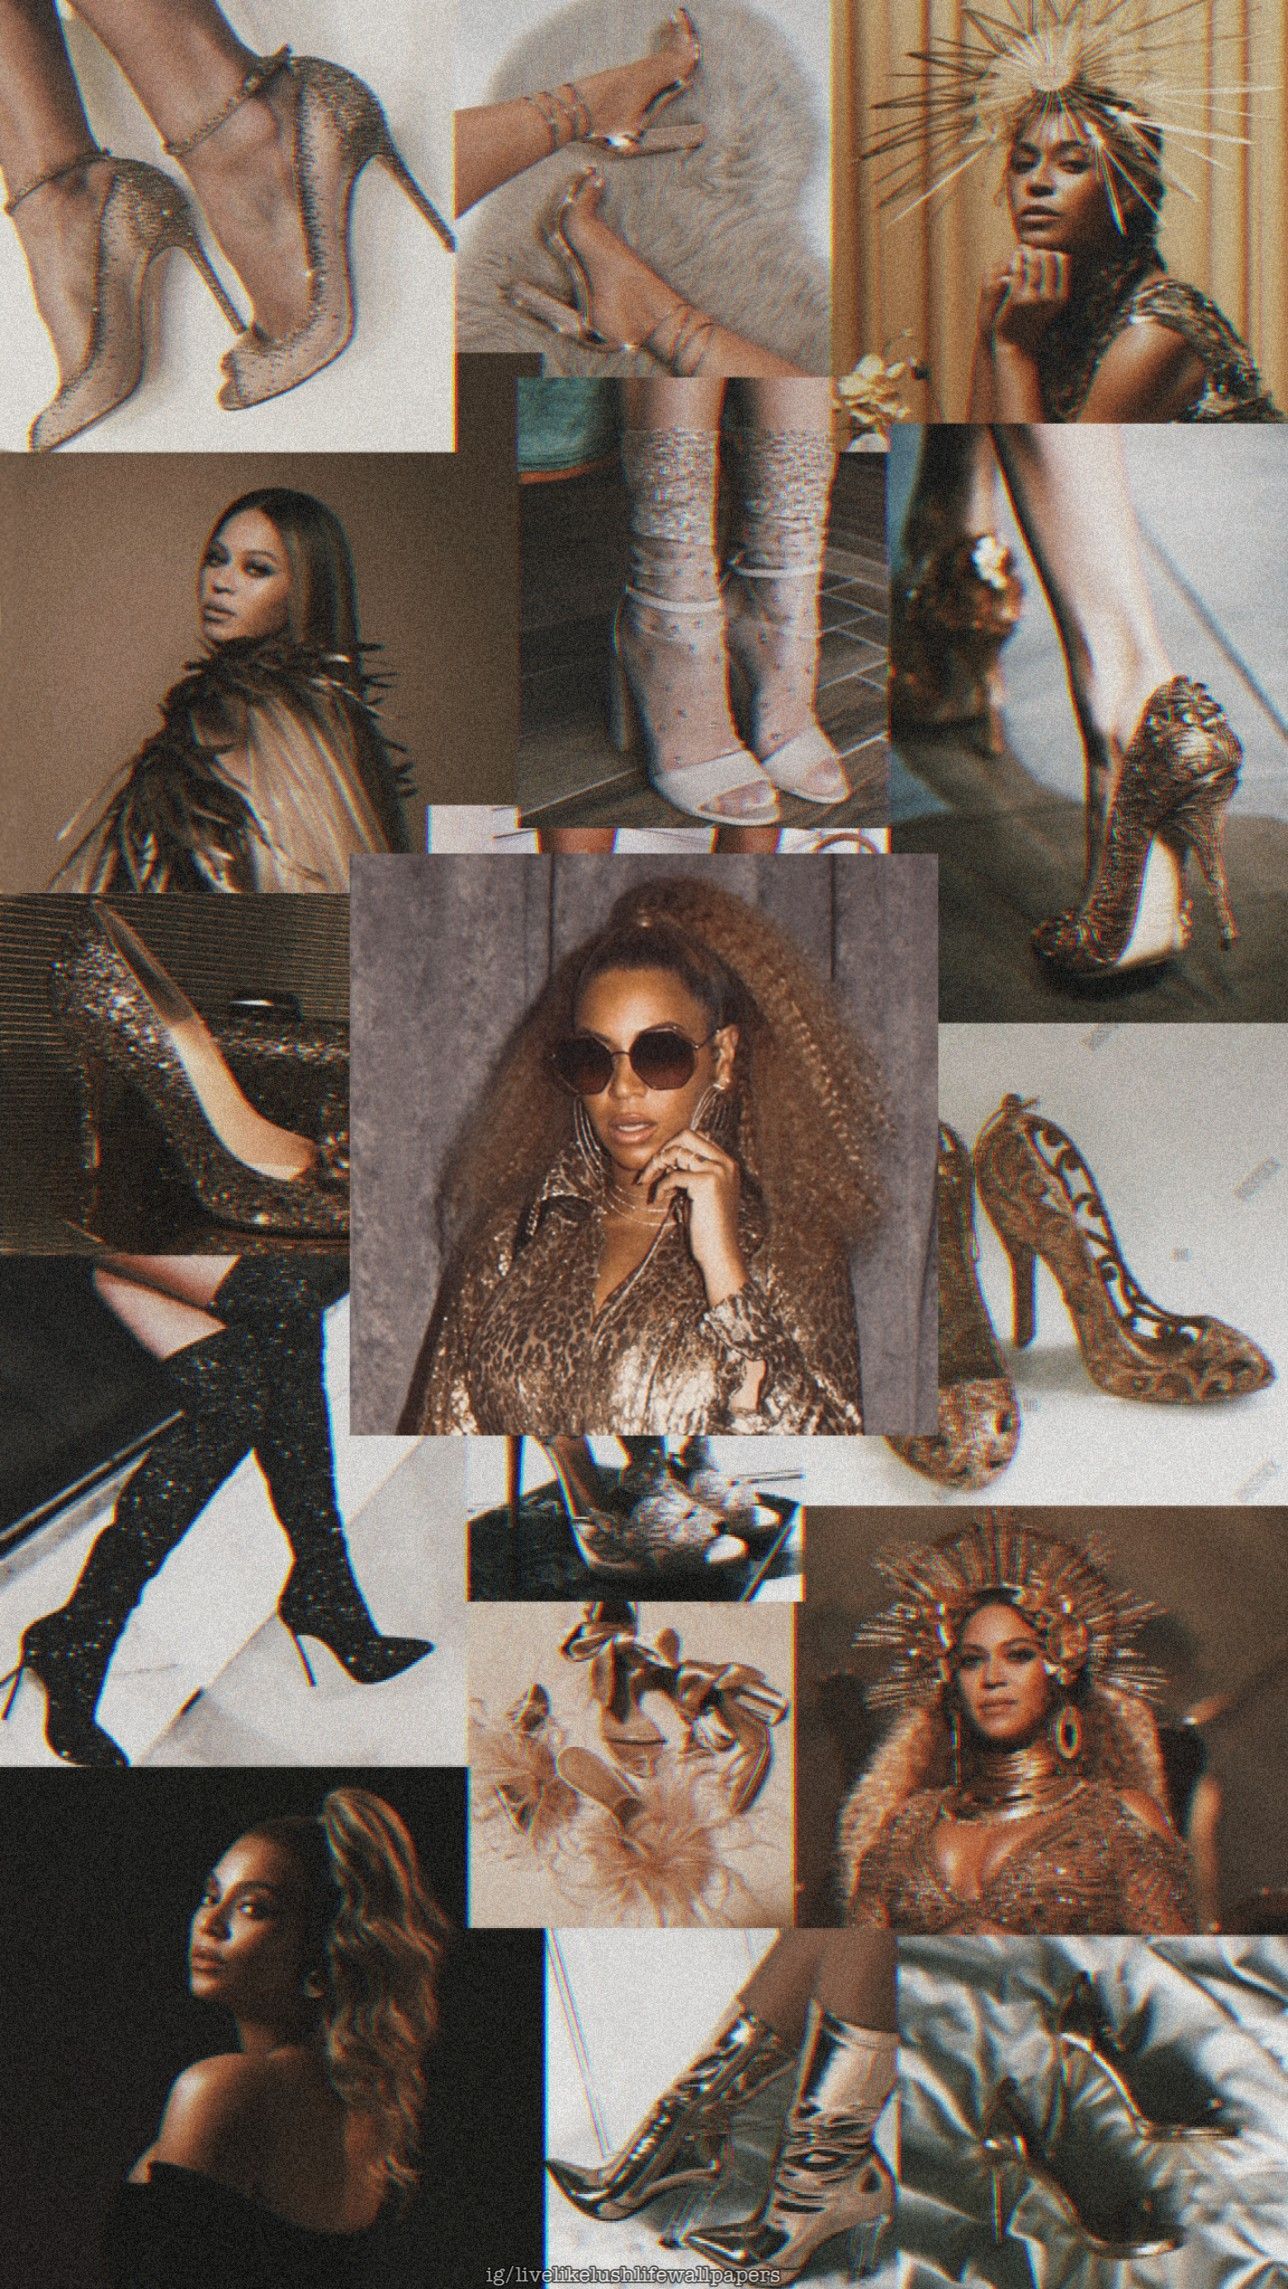 Beyonce Aesthetic Wallpaper. Black girls picture, Beyonce queen, Black girl magic